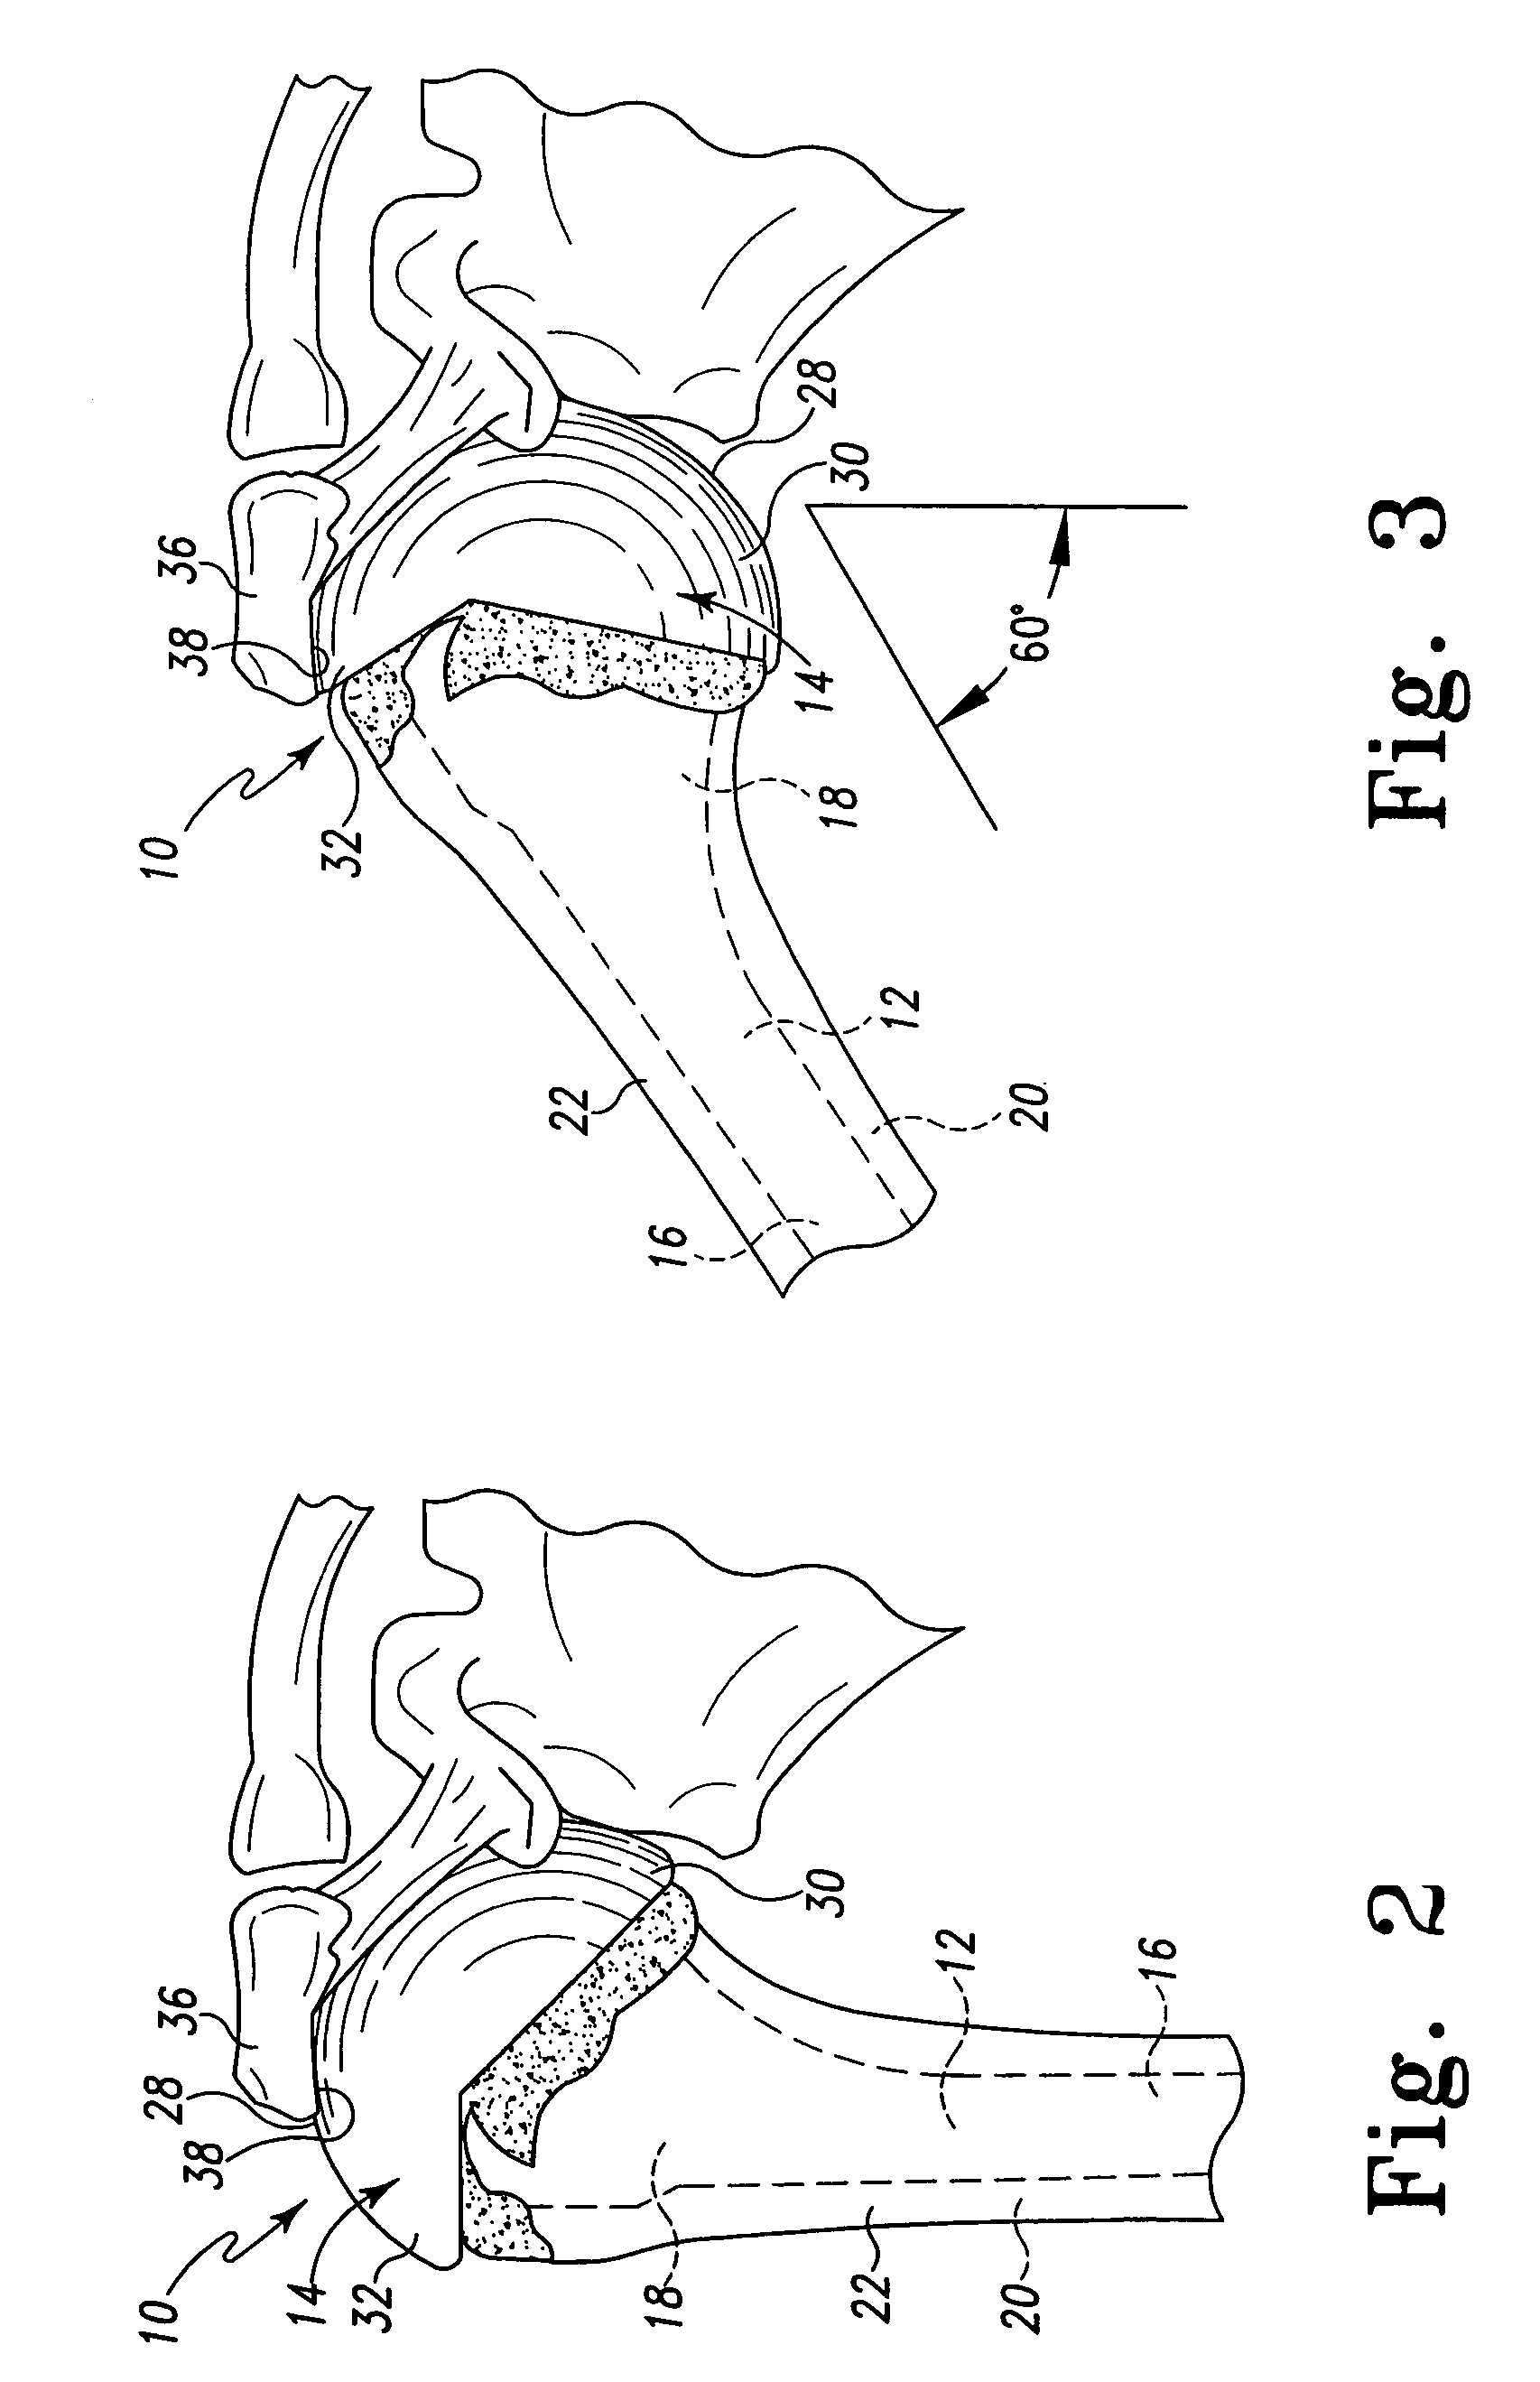 Bone resection apparatus